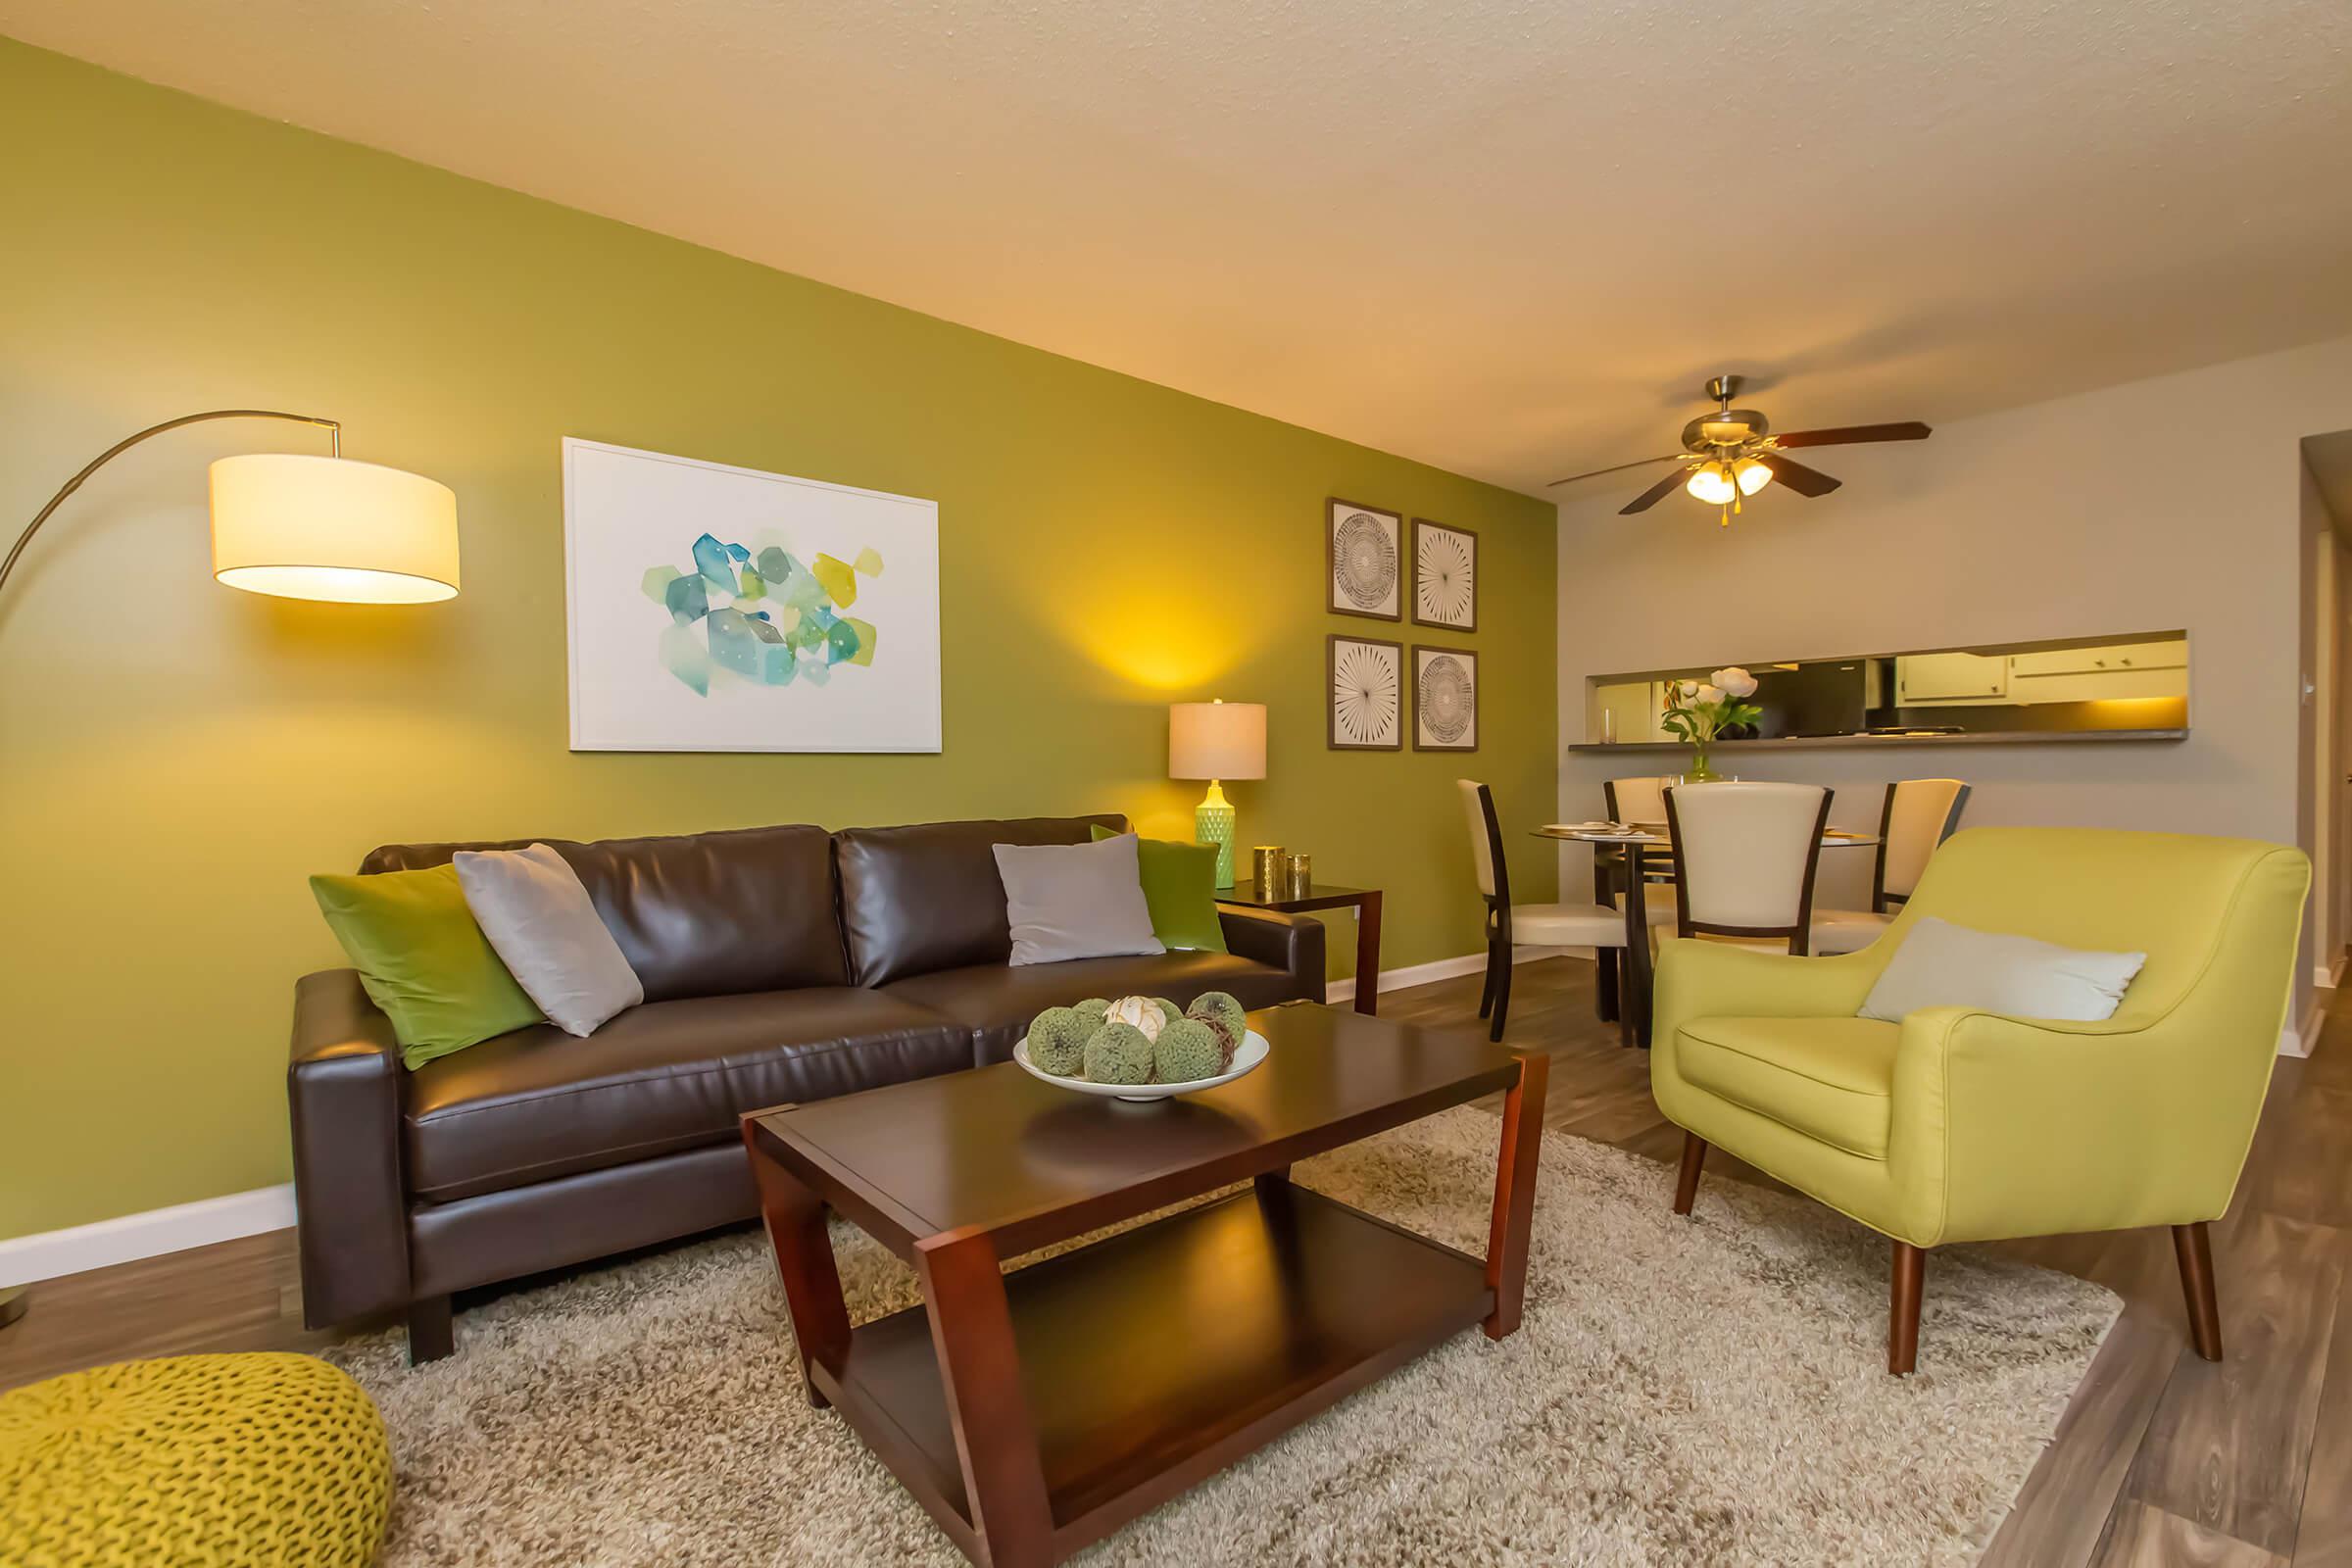 Living Space with Accent Wall - Lakeside Place Apartments - Greenville - South Carolina